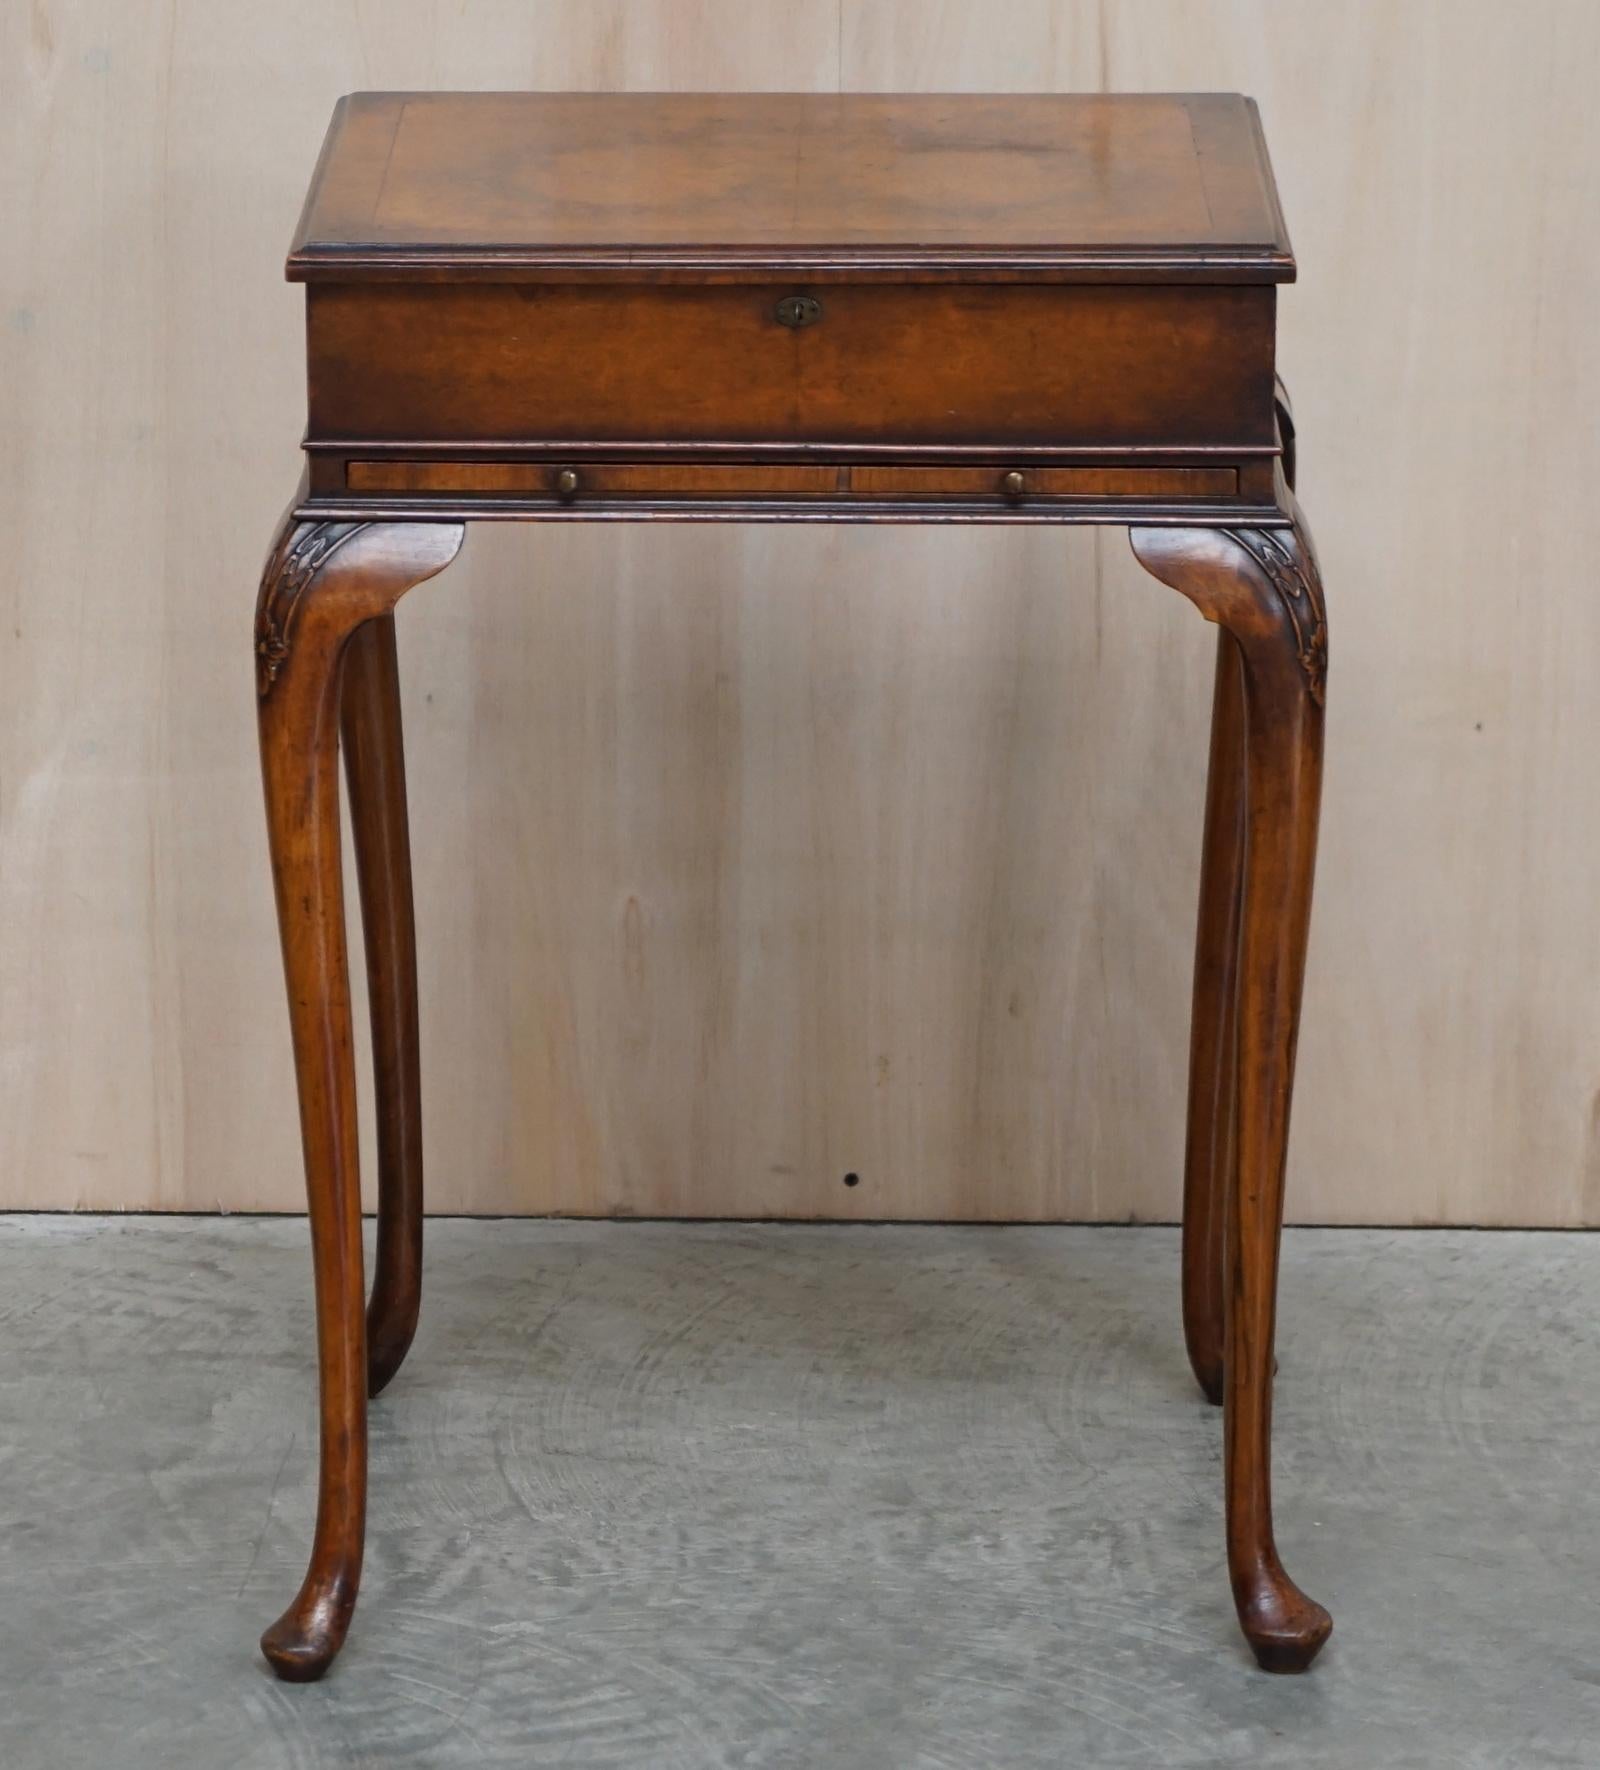 Late Victorian Exquisite Burr Walnut Jewellery Box Burr Walnut Side End Table with Glass Shelf For Sale